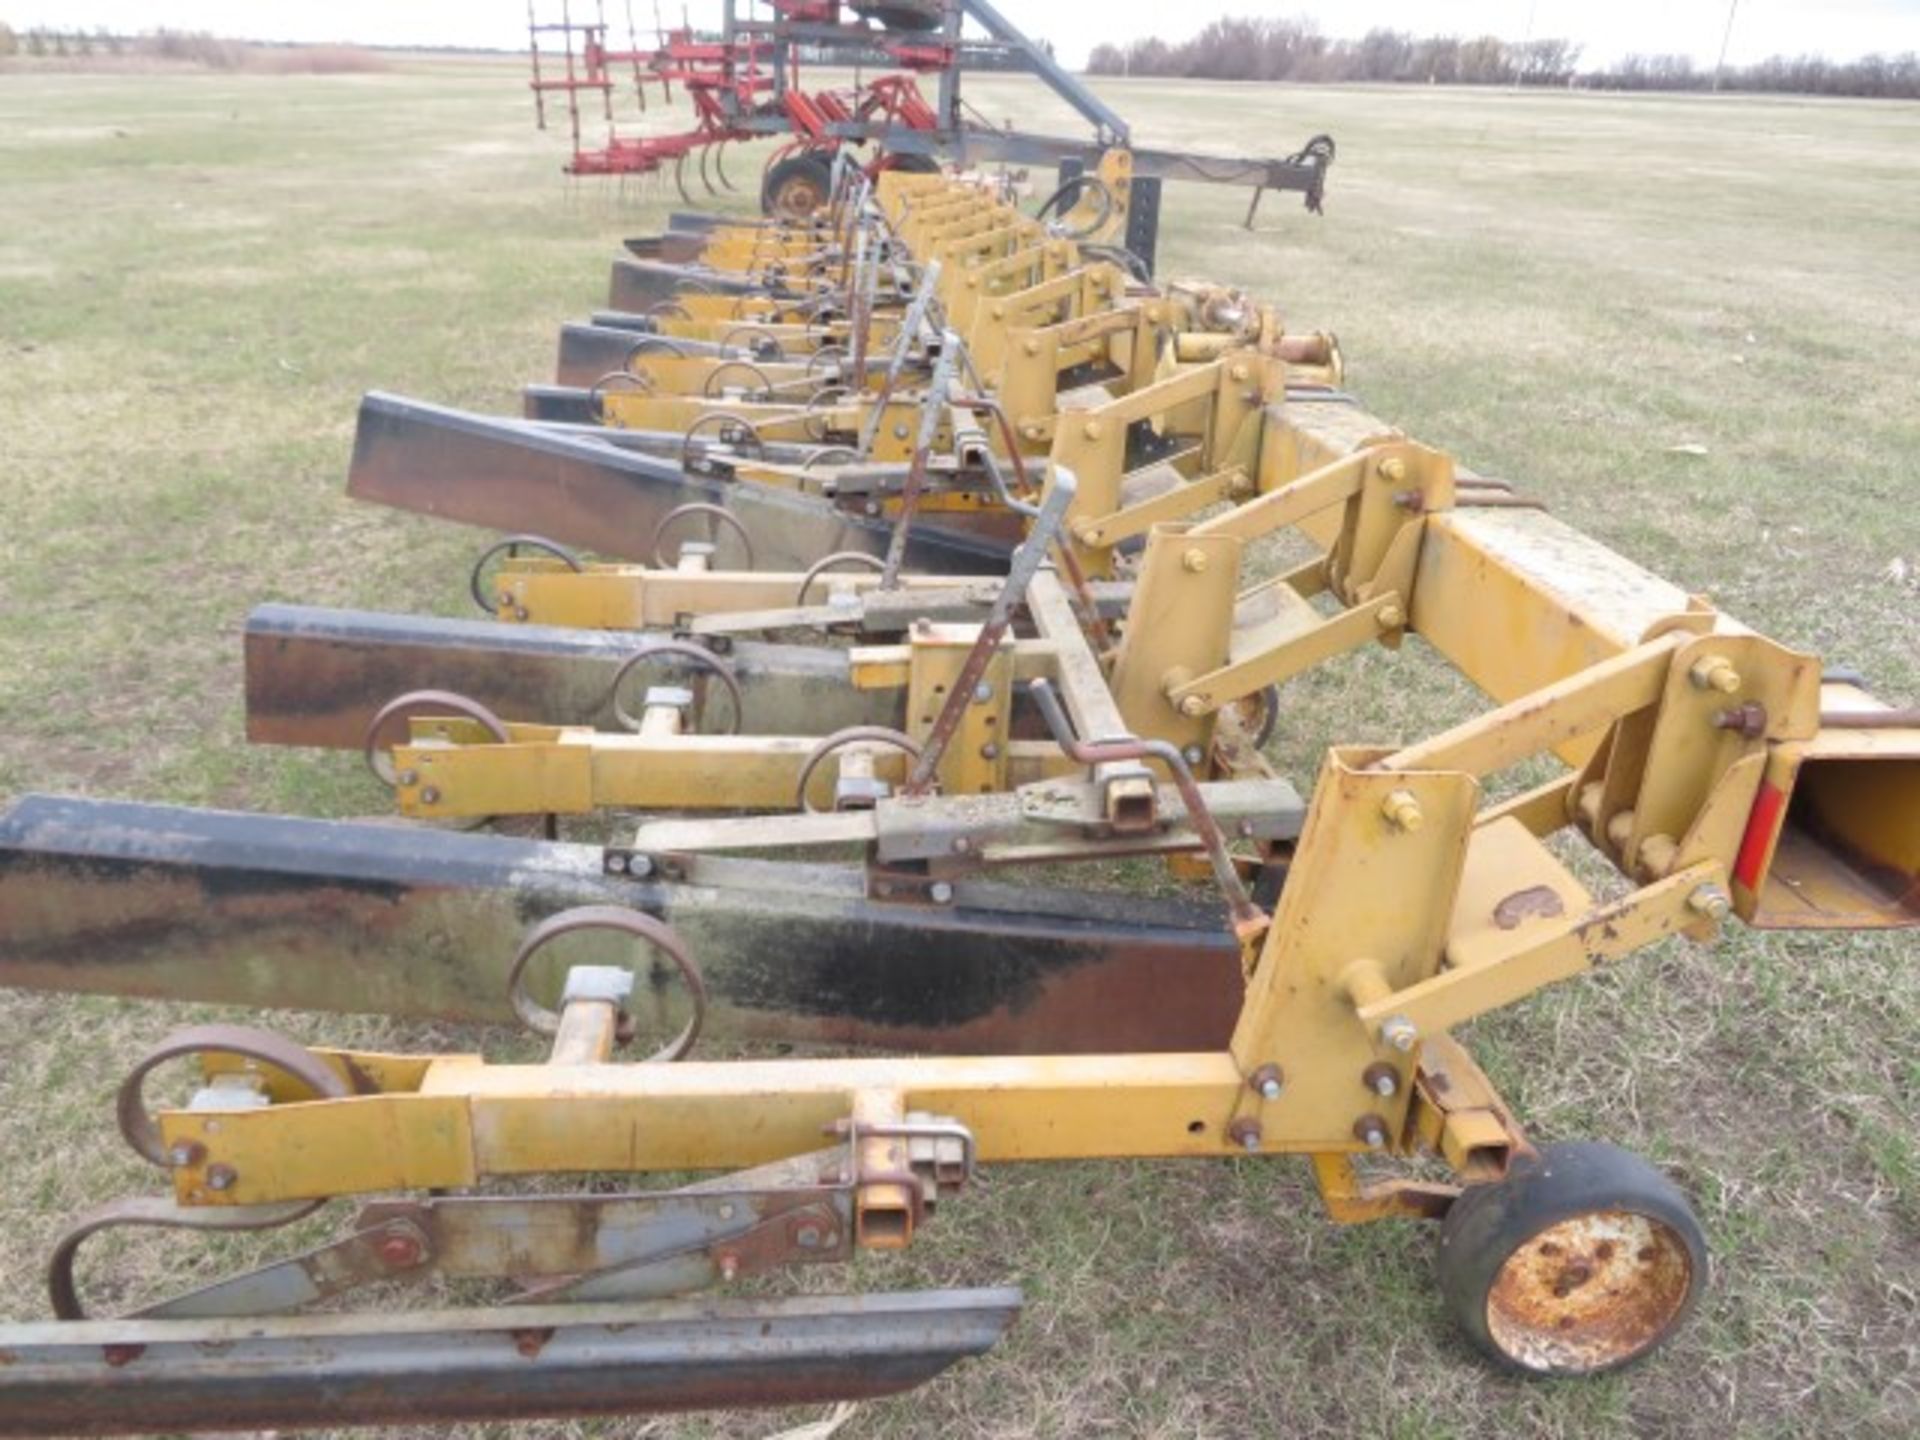 Alloway model 213, 5 s-tine row crop cultivator